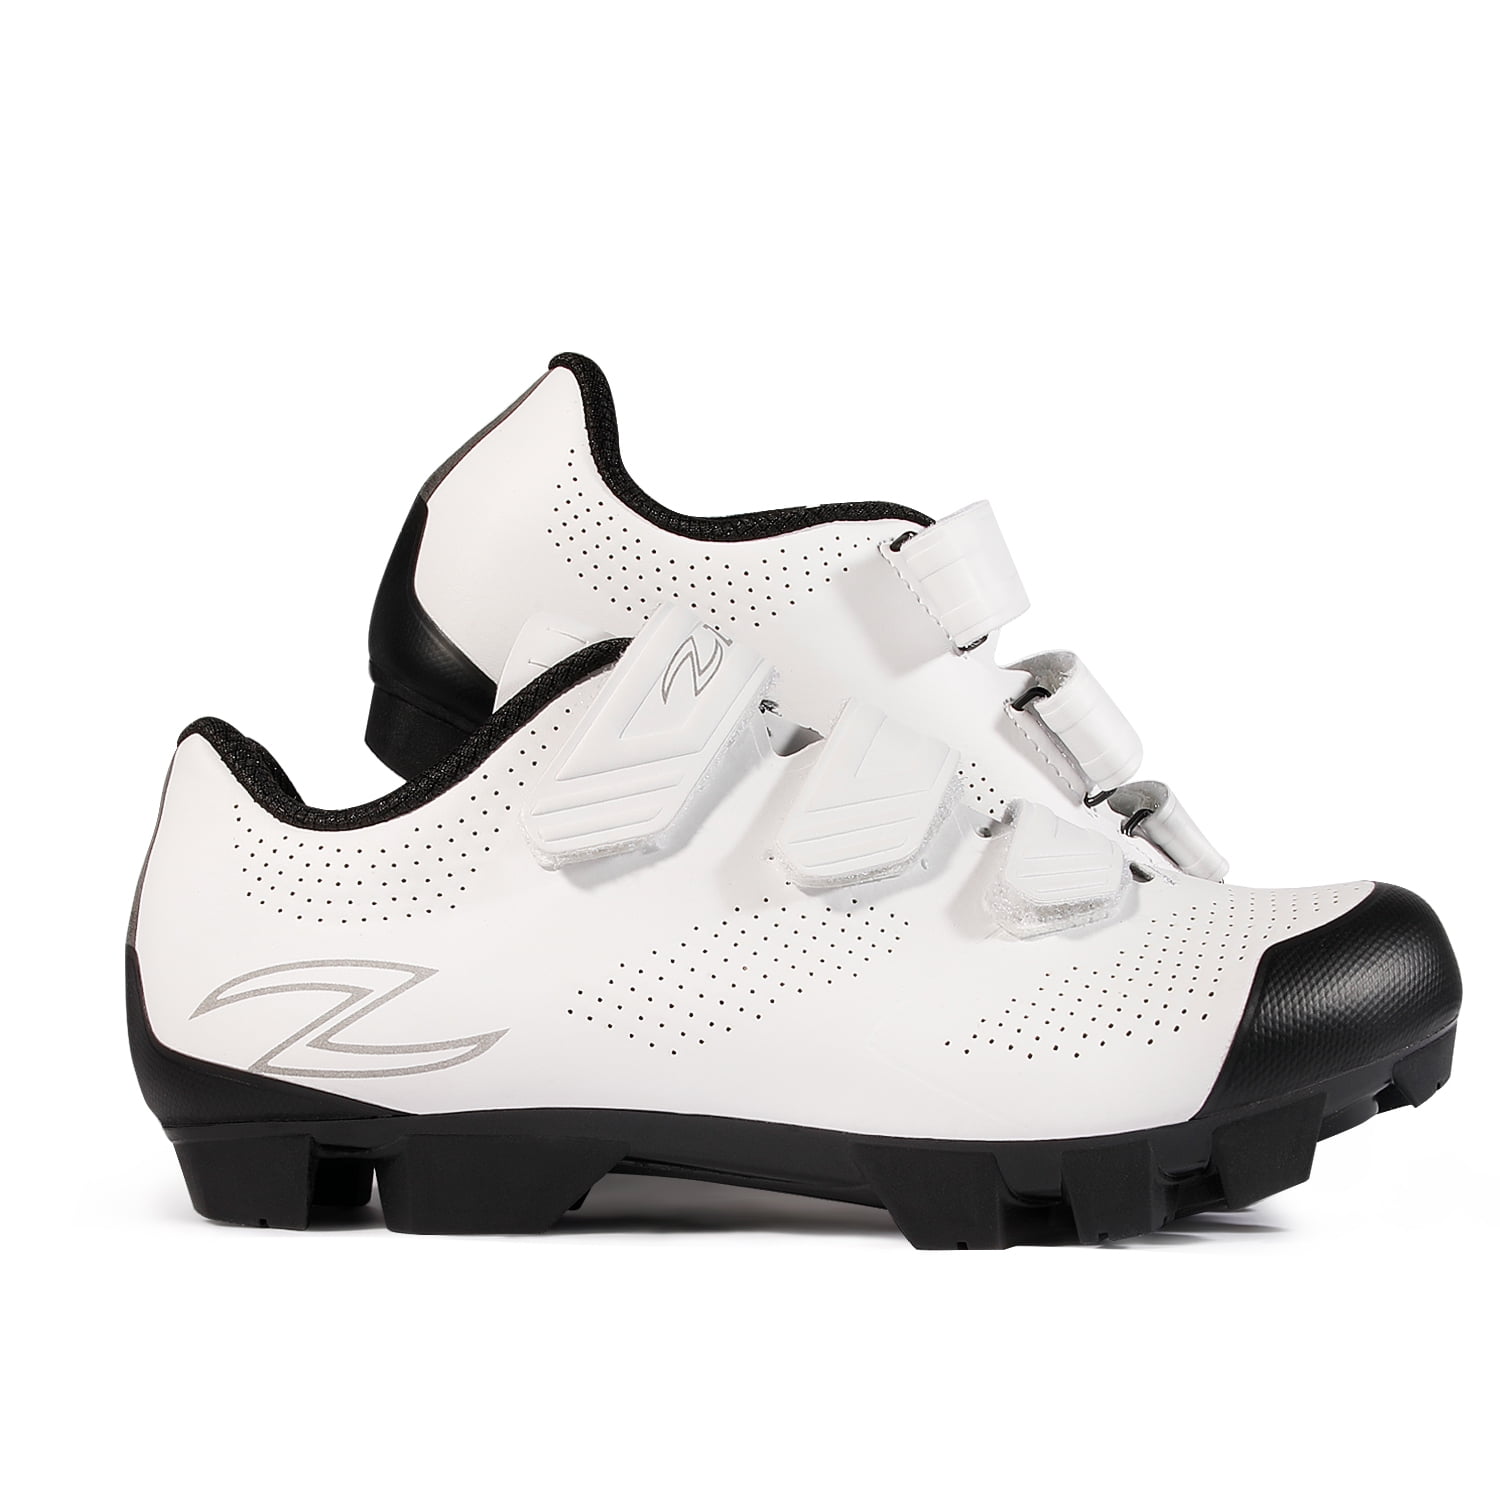 Zol White MTB Indoor Cycling Shoes Cleats 